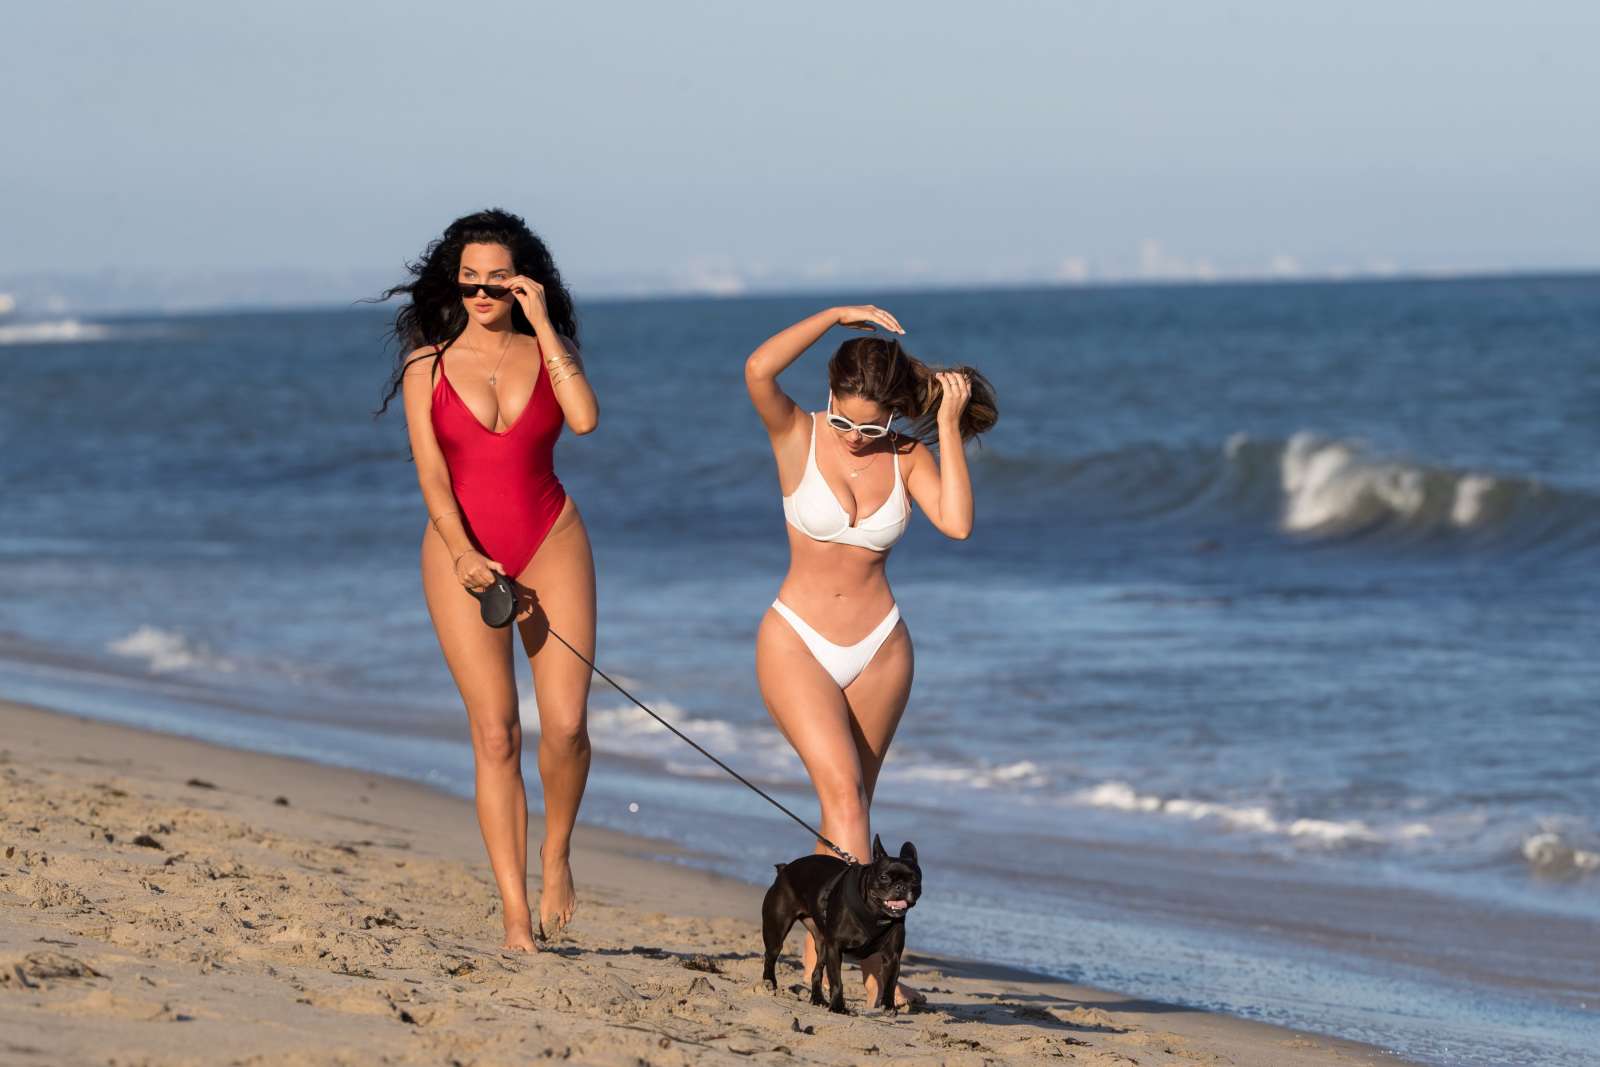 Natalie Halcro and Olivia Pierson in Red and White Bikini on the beach in M...